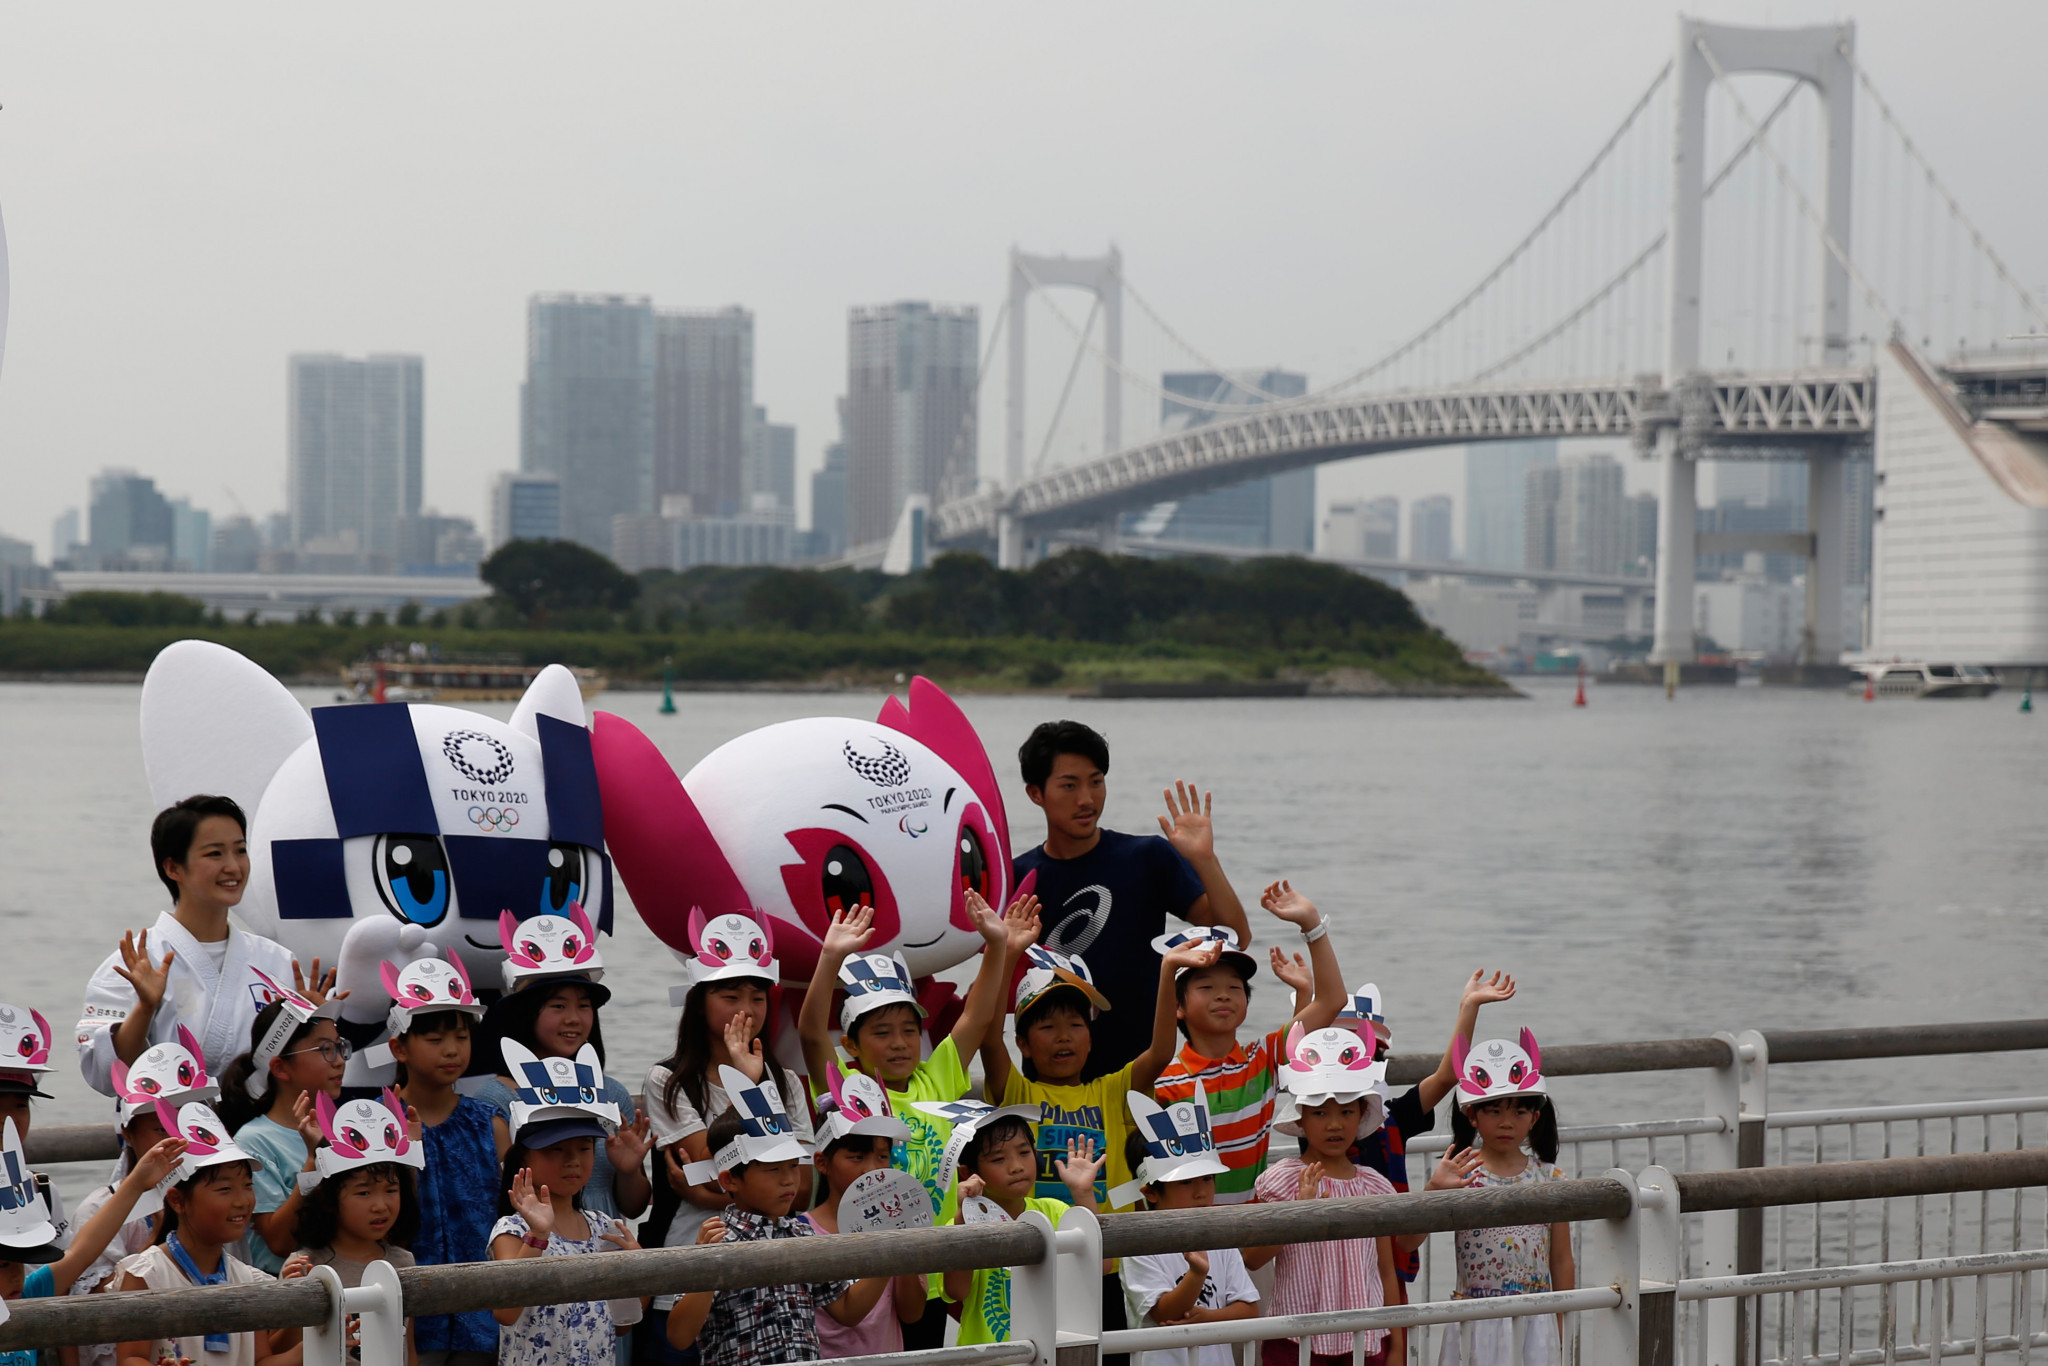 Concerns were raised over the water quality at the Tokyo 2020 venue ©Getty Images